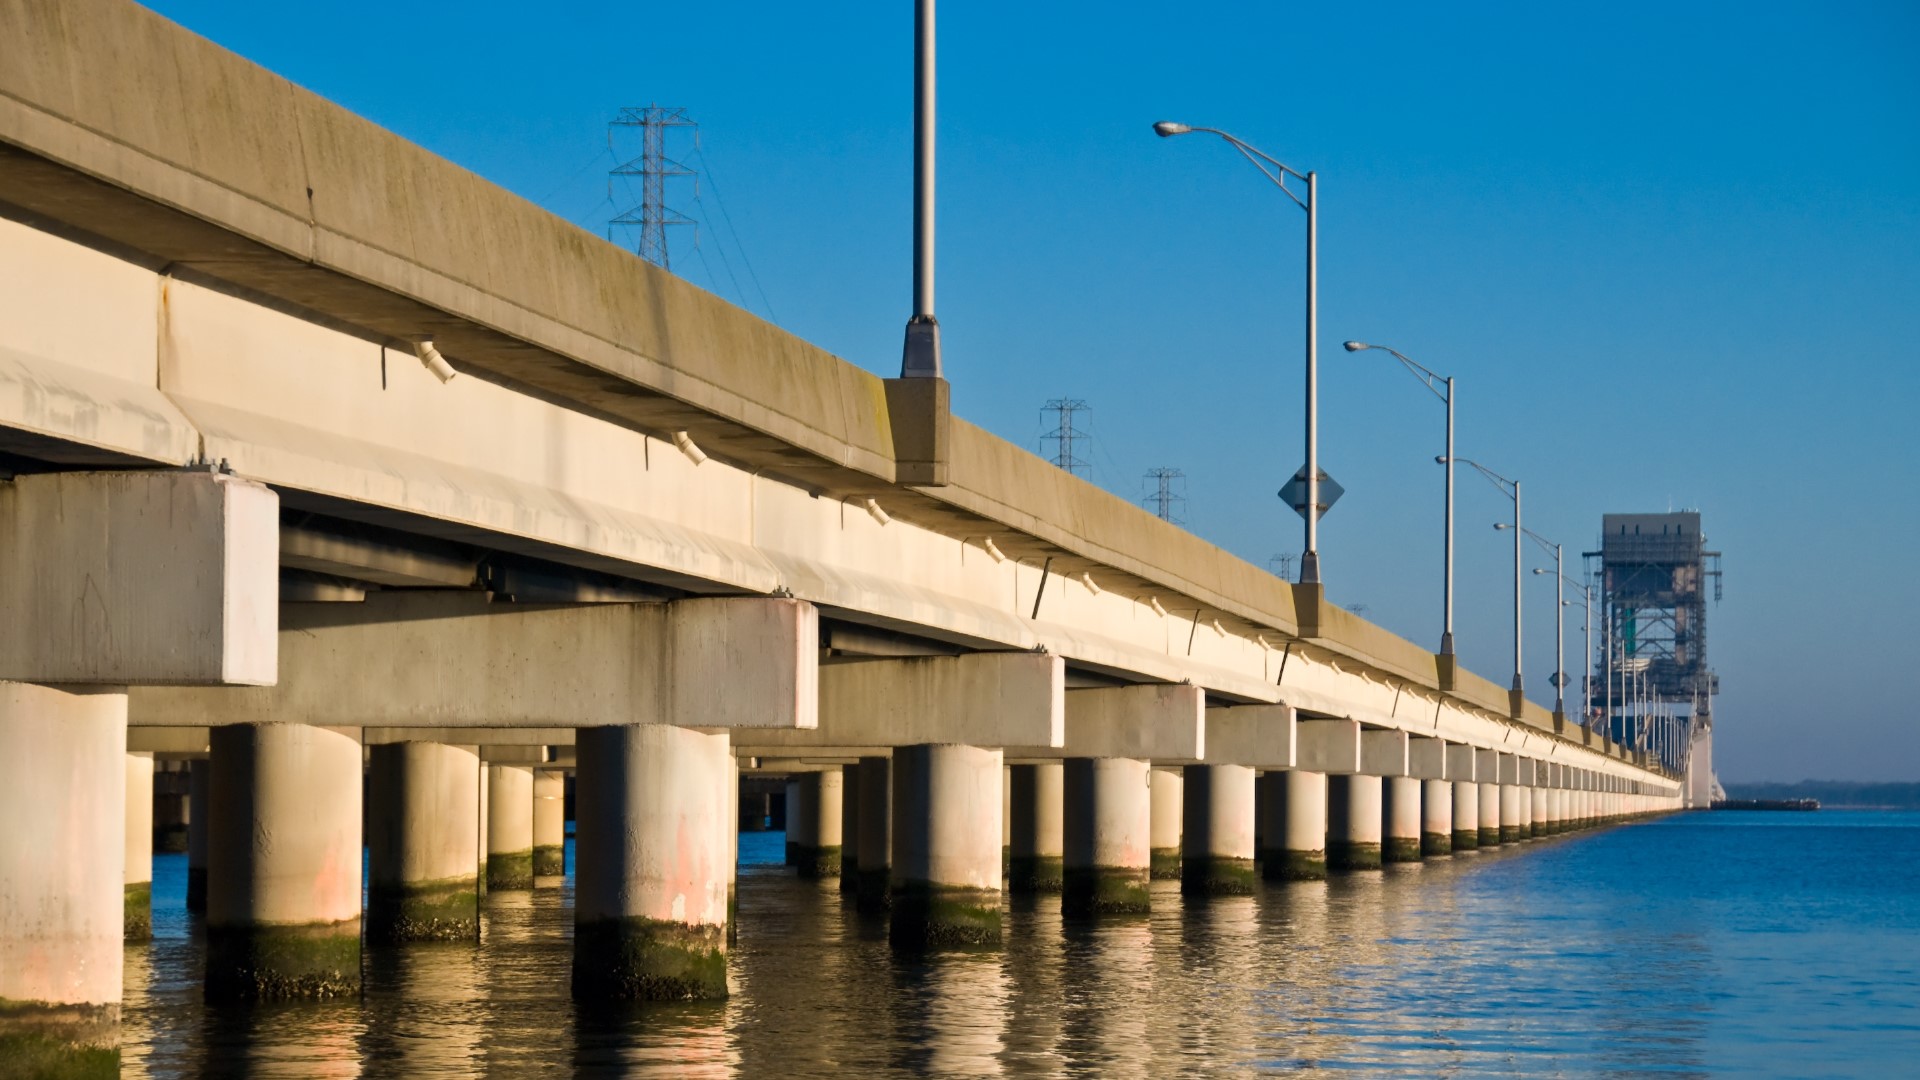 Drivers crossing the James River Bridge (JRB) during the day this week could experience traffic delays due to planned lane closures.